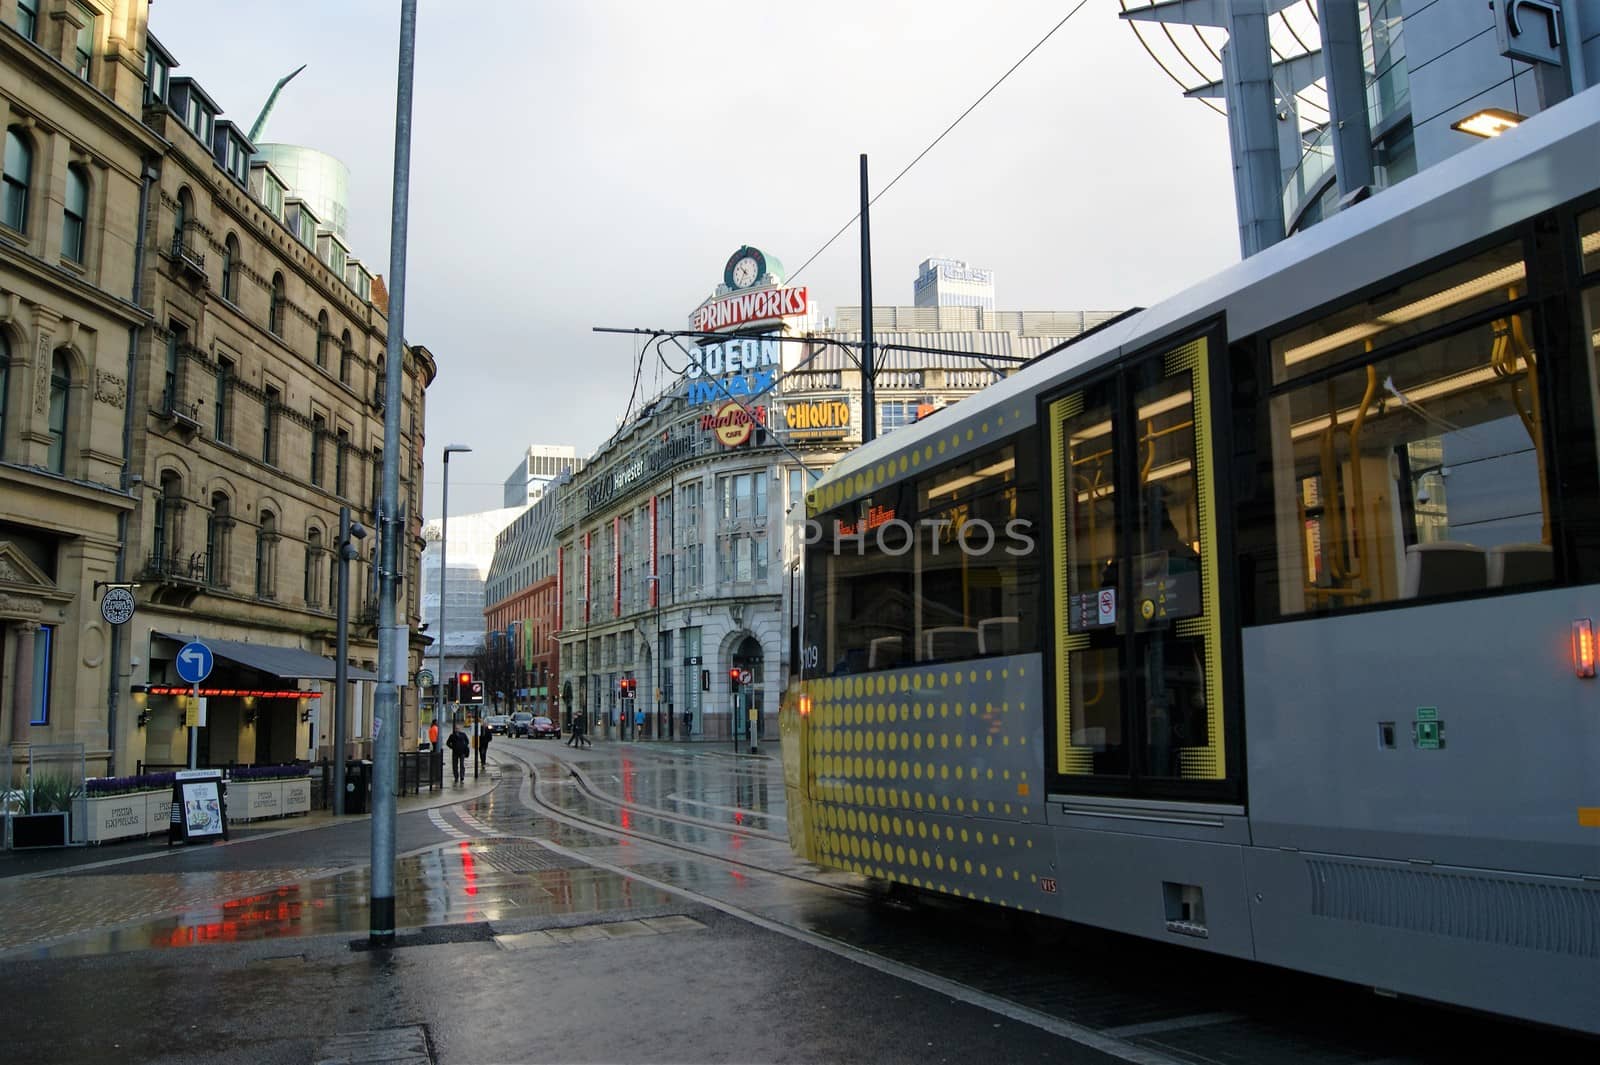 An Electric Tram in Manchester. by paulst